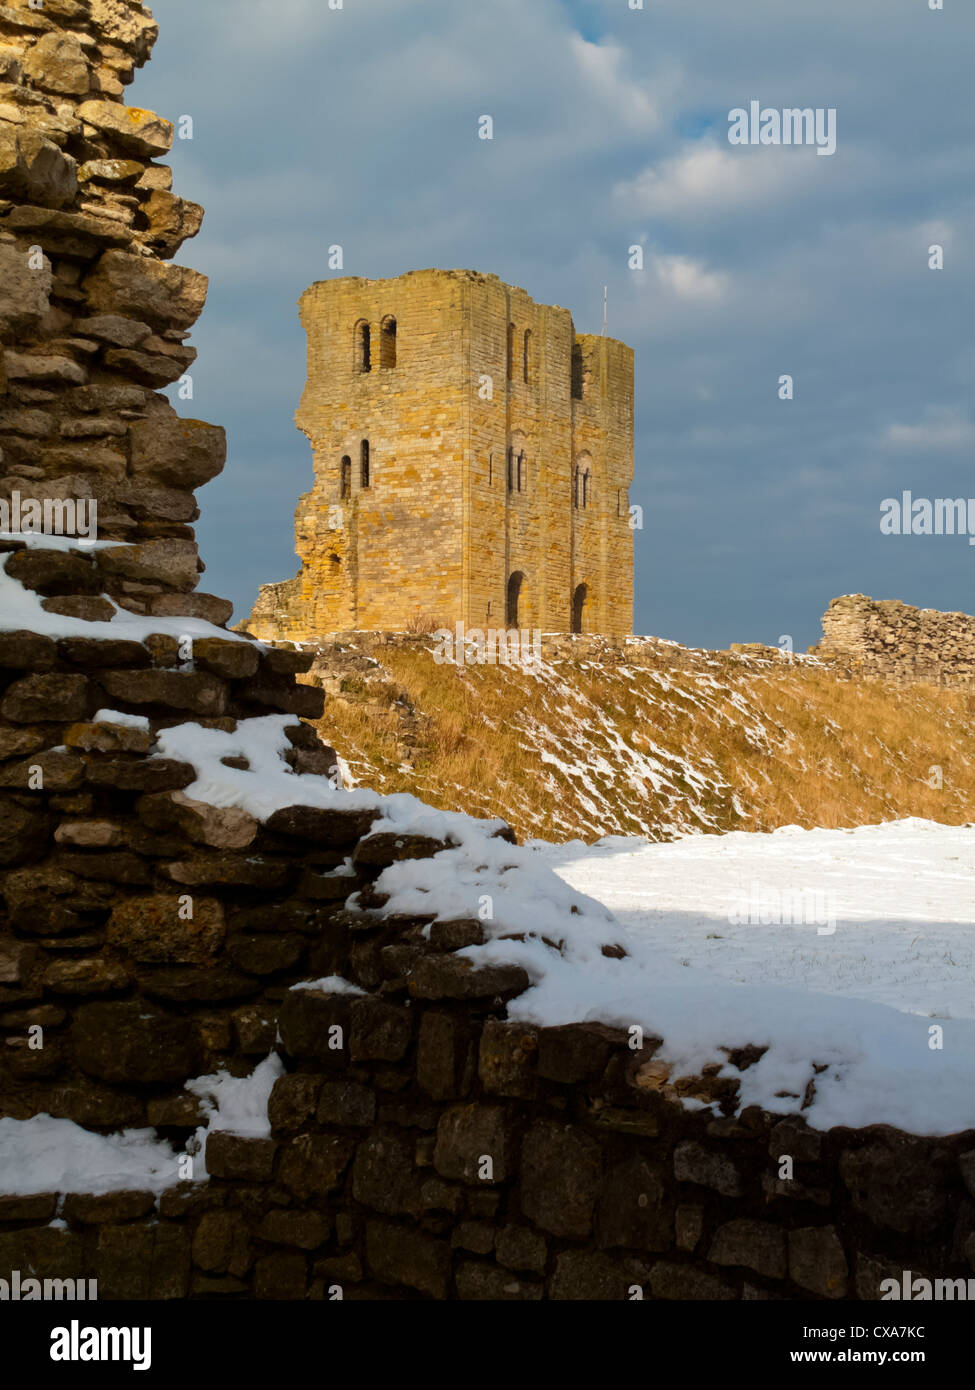 The 12th century keep of Scarborough Castle a medieval fortress in ...